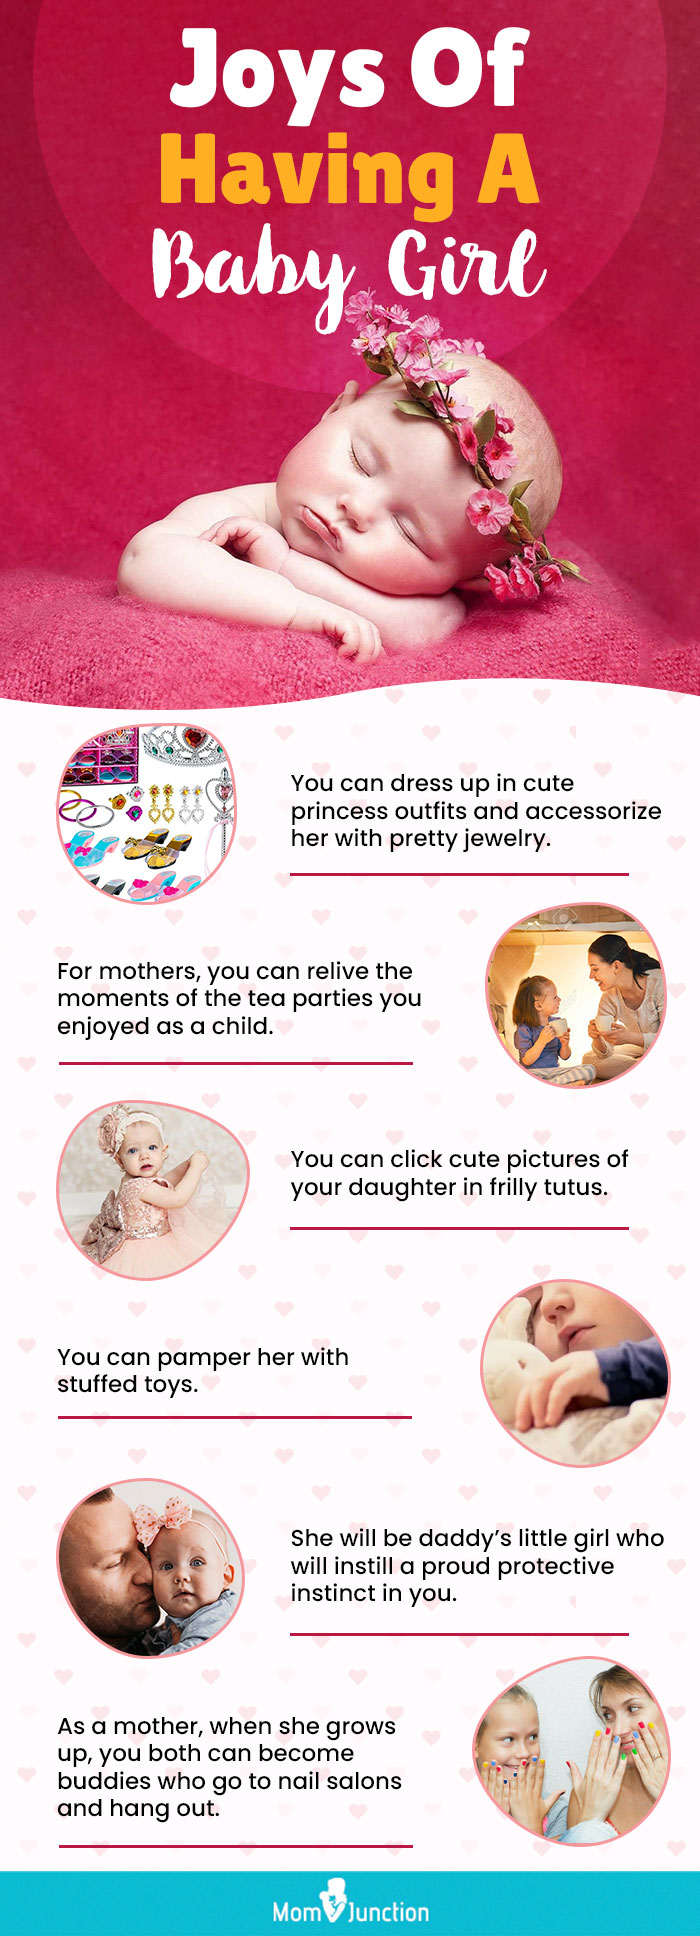 joys of having a baby girl (infographic)